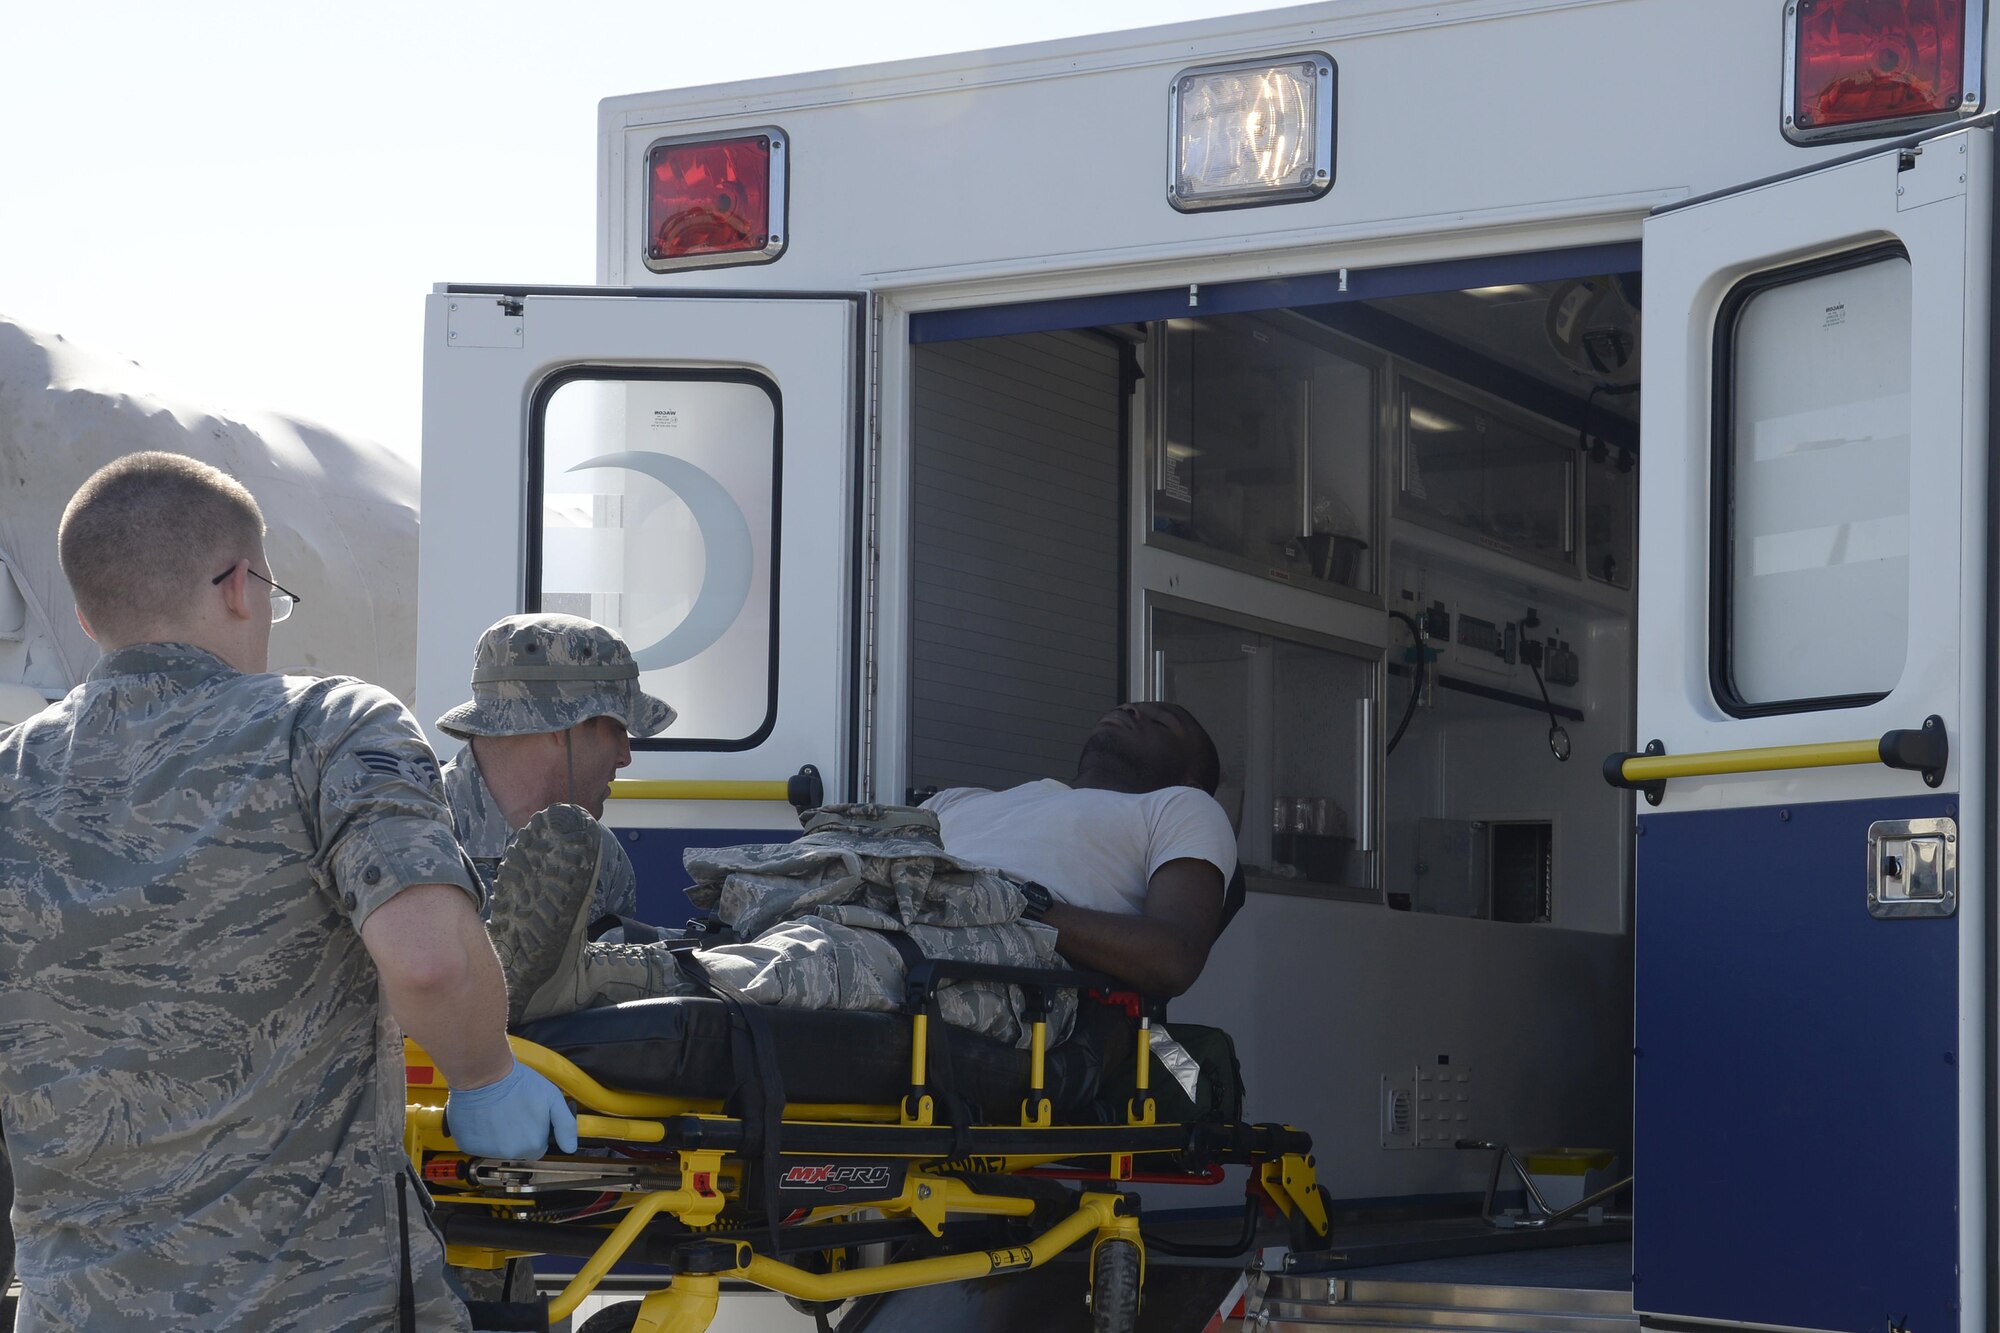 Senior Airman Garrett, left, and Staff Sgt. Joshua, medical technicians, load a simulated patient into an ambulance during a training exercise at an undisclosed location in Southwest Asia Jan. 15, 2015. Airmen participating in the exercise were given the opportunity to receive first-hand experience as well as gain learning experience on handling potential disease outbreaks. Garrett is currently deployed from Joint Base Langley-Eustis, Va., and is a native of Denver, Colo. Joshua is currently deployed from Joint Base Langley-Eustis, Va., and is a native of Celina, Ohio. (U.S. Air Force photo/Tech. Sgt. Marie Brown)